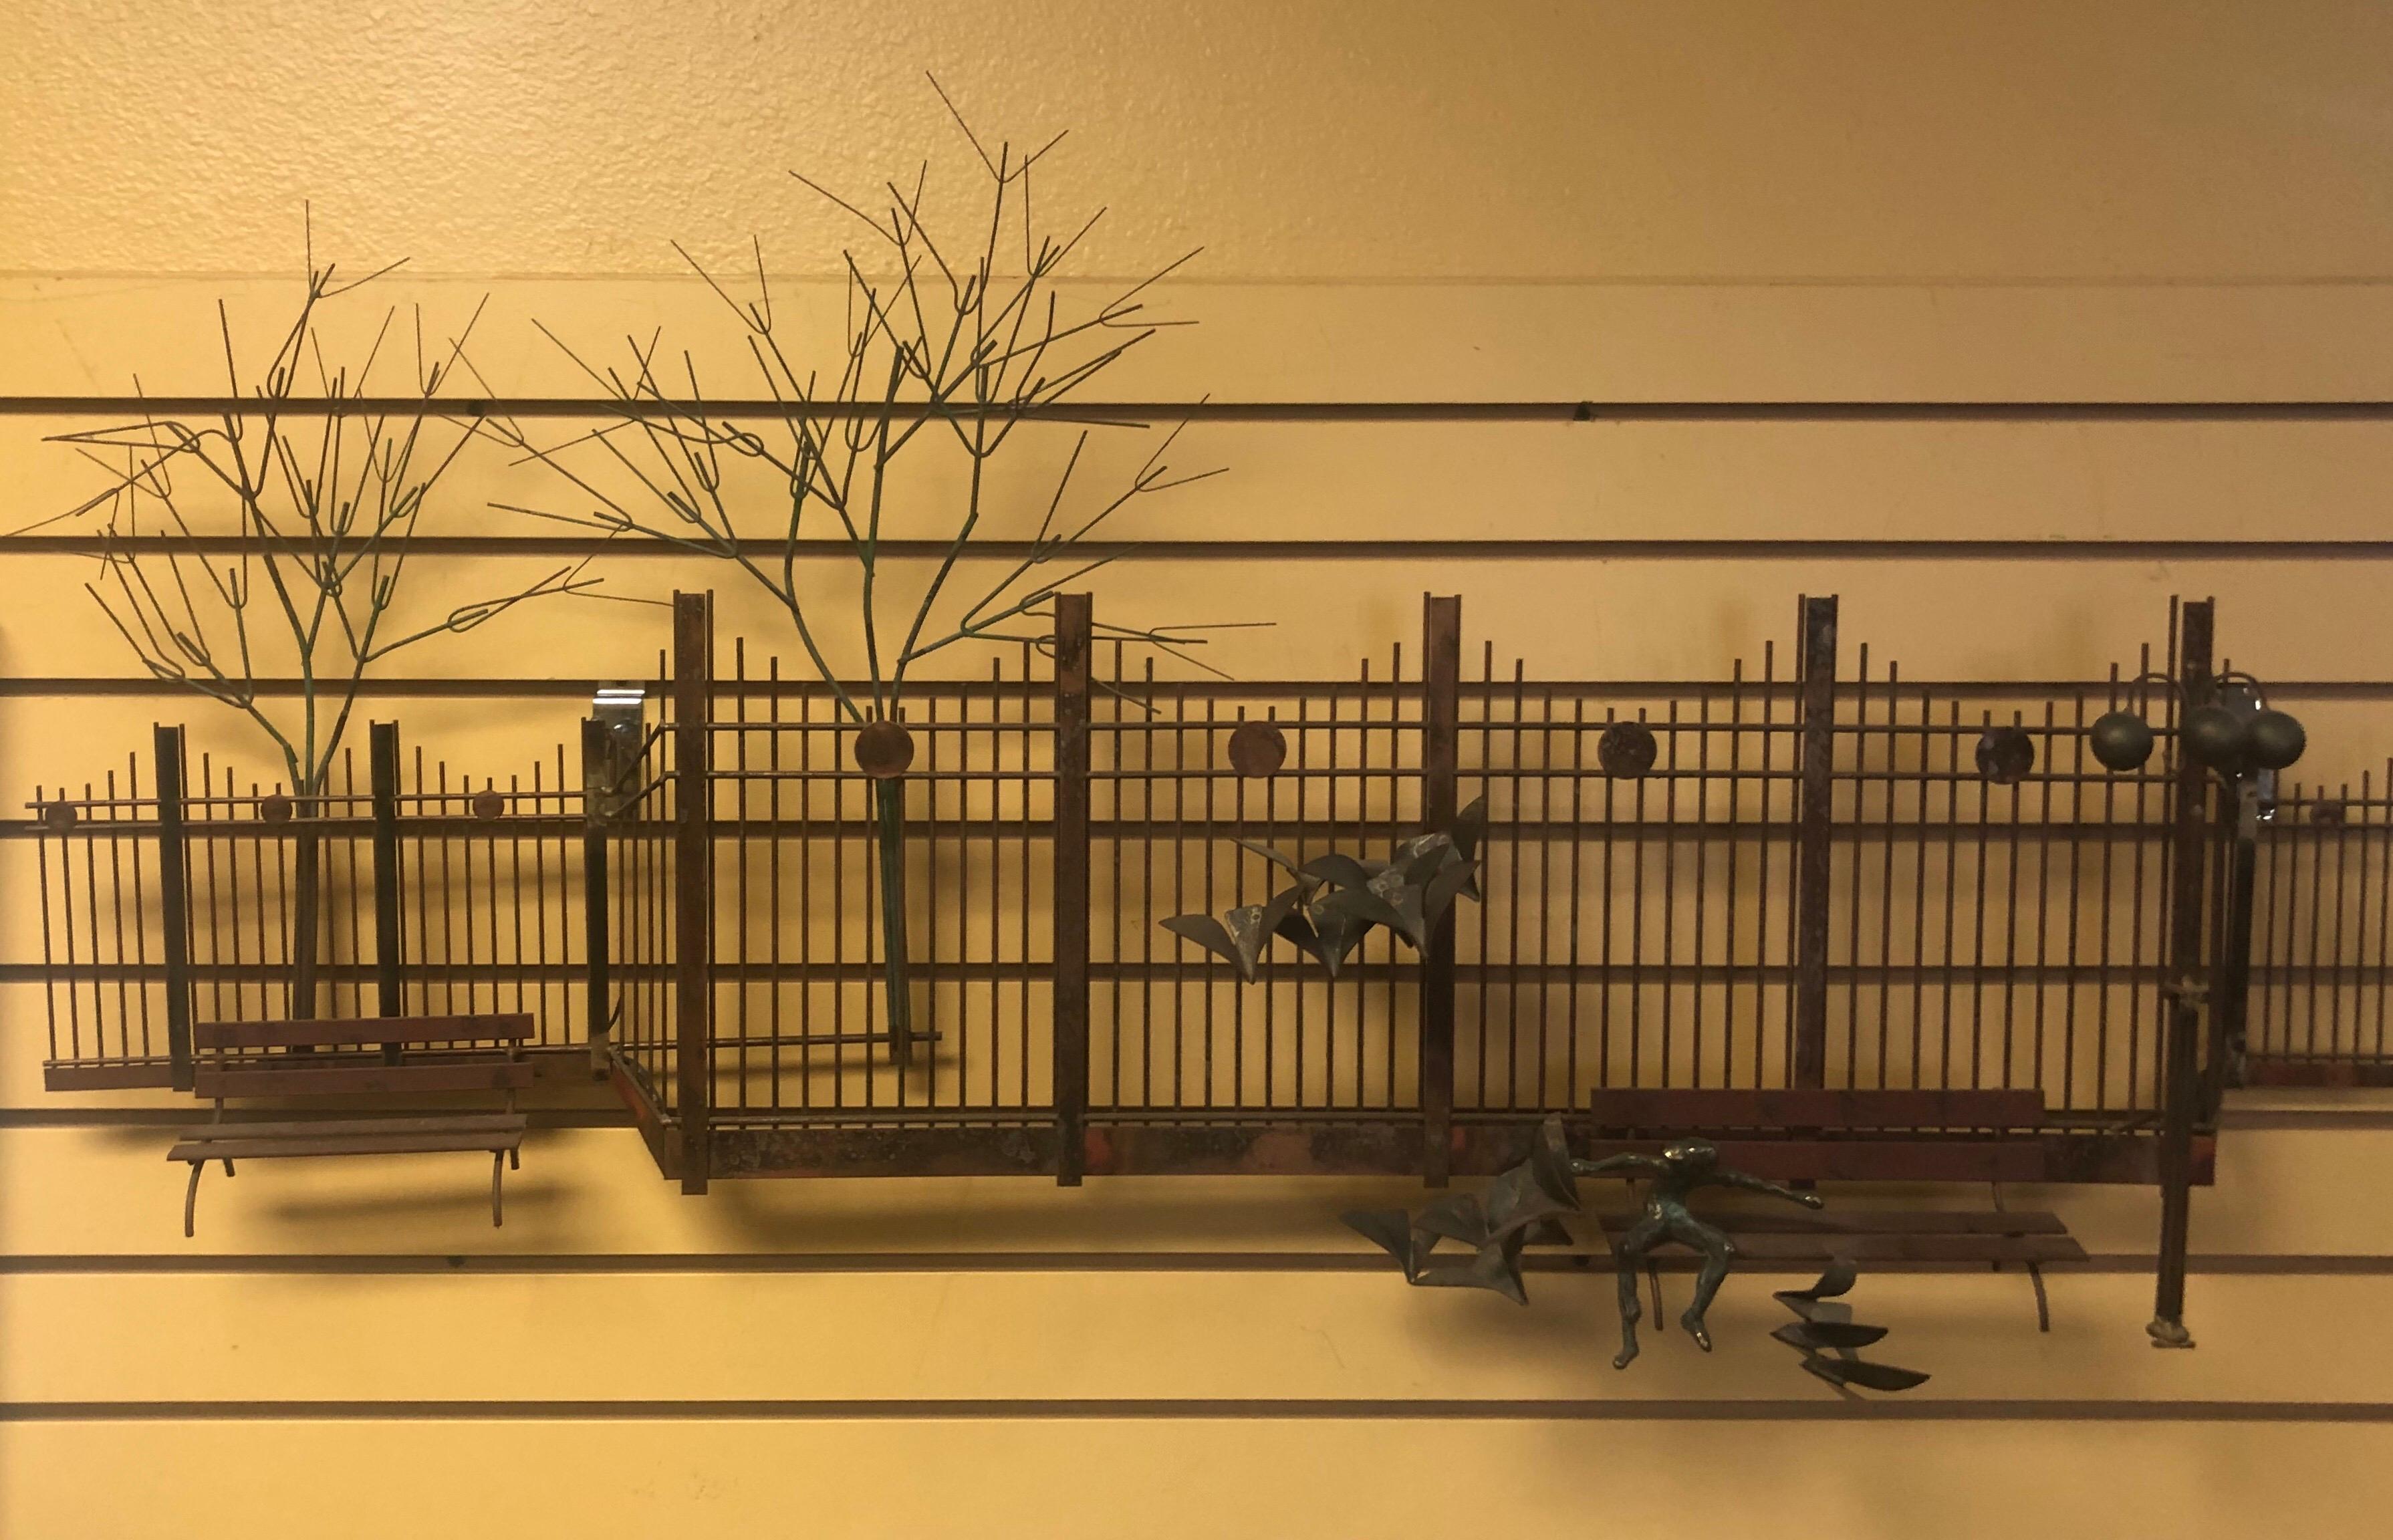 Unique park scene mixed metal wall sculpture by C. Jere for Artisan House, circa 1972. The piece, depicting a boy sitting on park bench with birds in flight, a fence, trees and lamp post, is in very good condition and has great color and